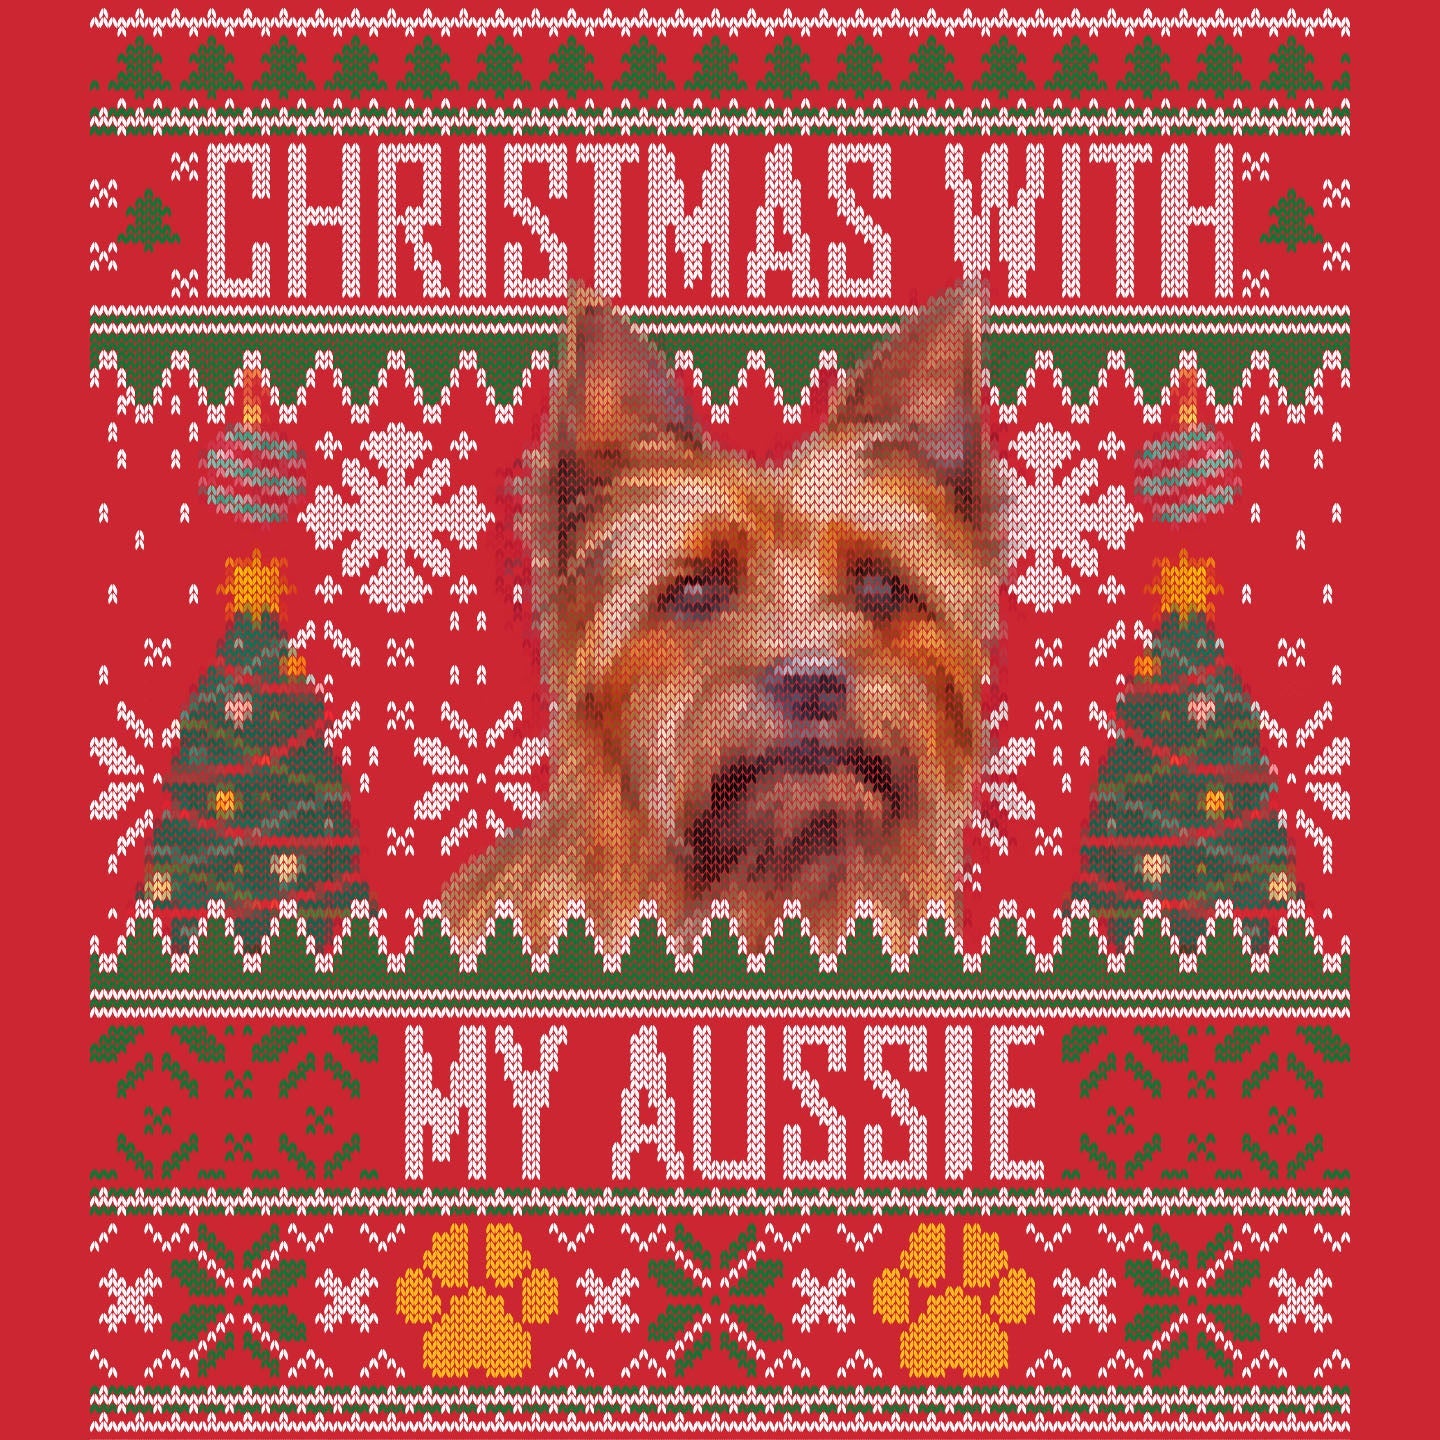 Ugly Sweater Christmas with My Australian Terrier - Adult Unisex Long Sleeve T-Shirt